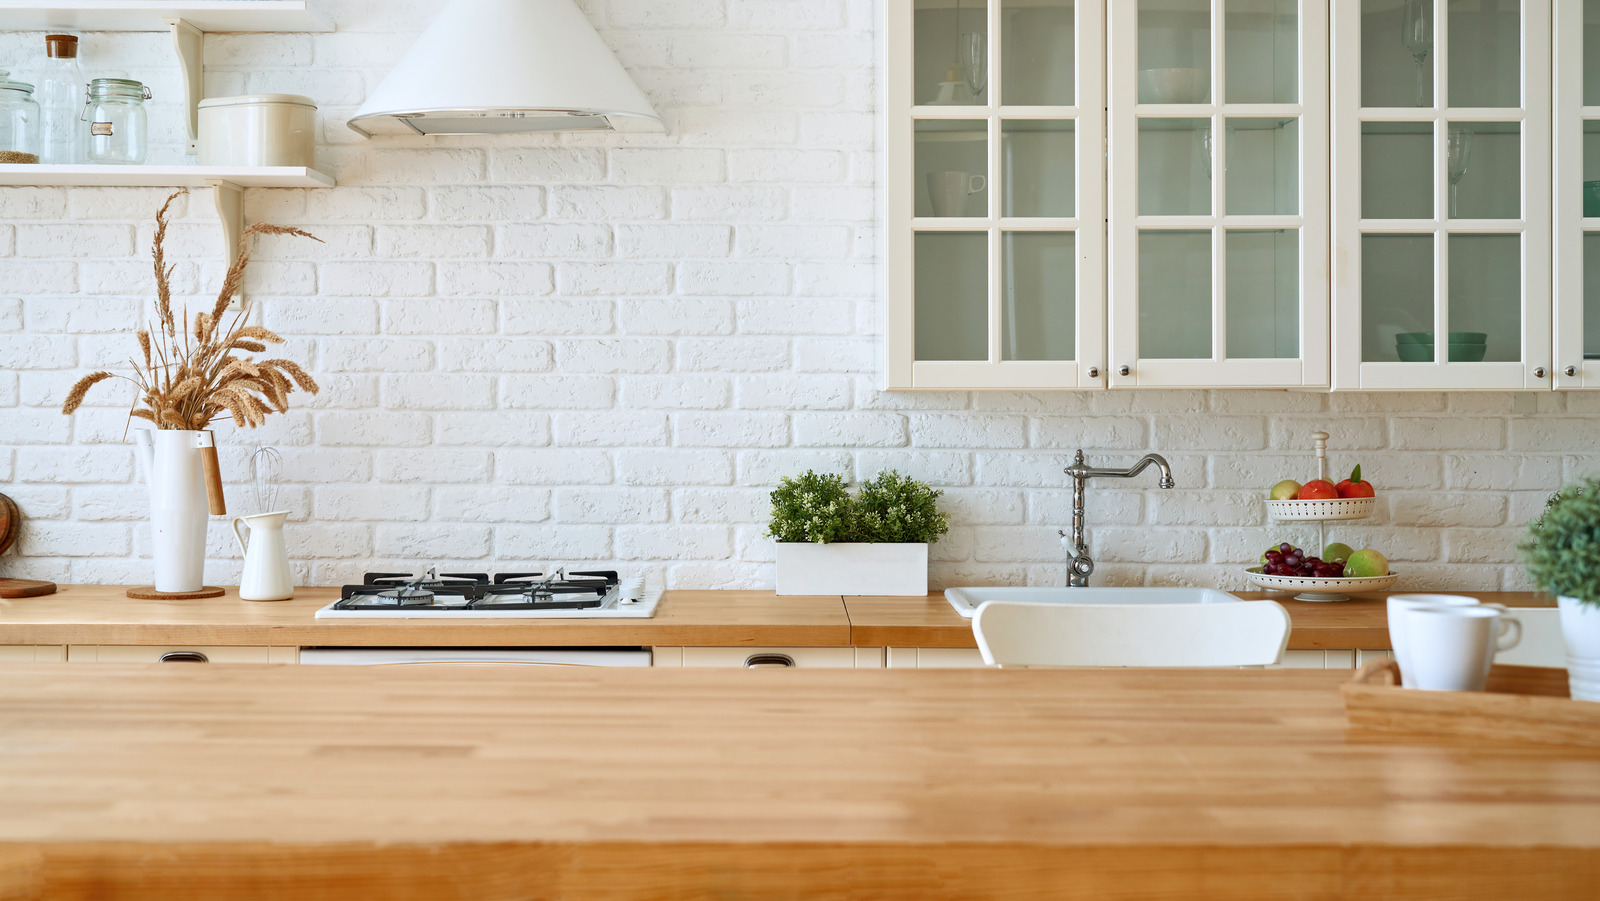 The Charm of Scandinavian Style Kitchens